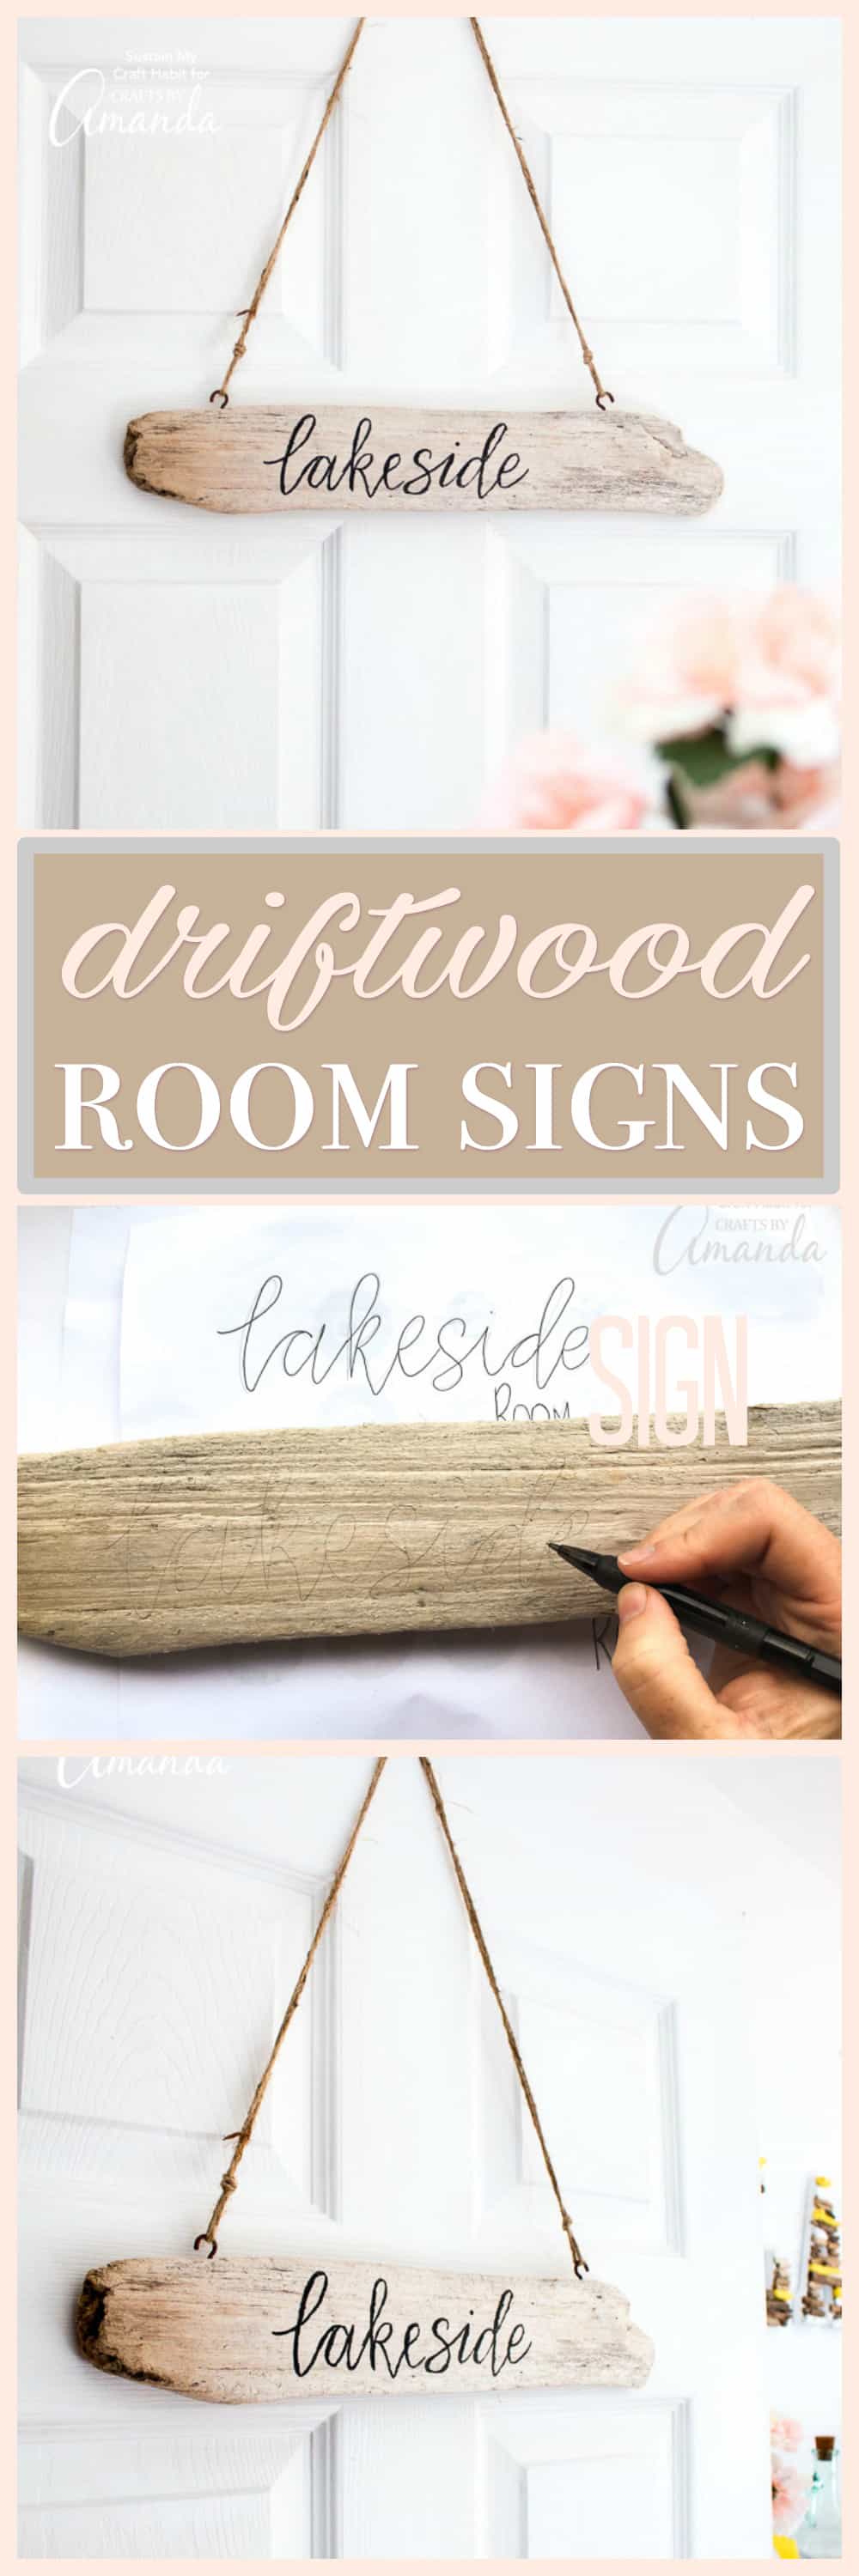 Learn how to make a DIY rustic driftwood sign for the lake house or cottage! A fun bedroom decor idea with a step-by-step tutorial.